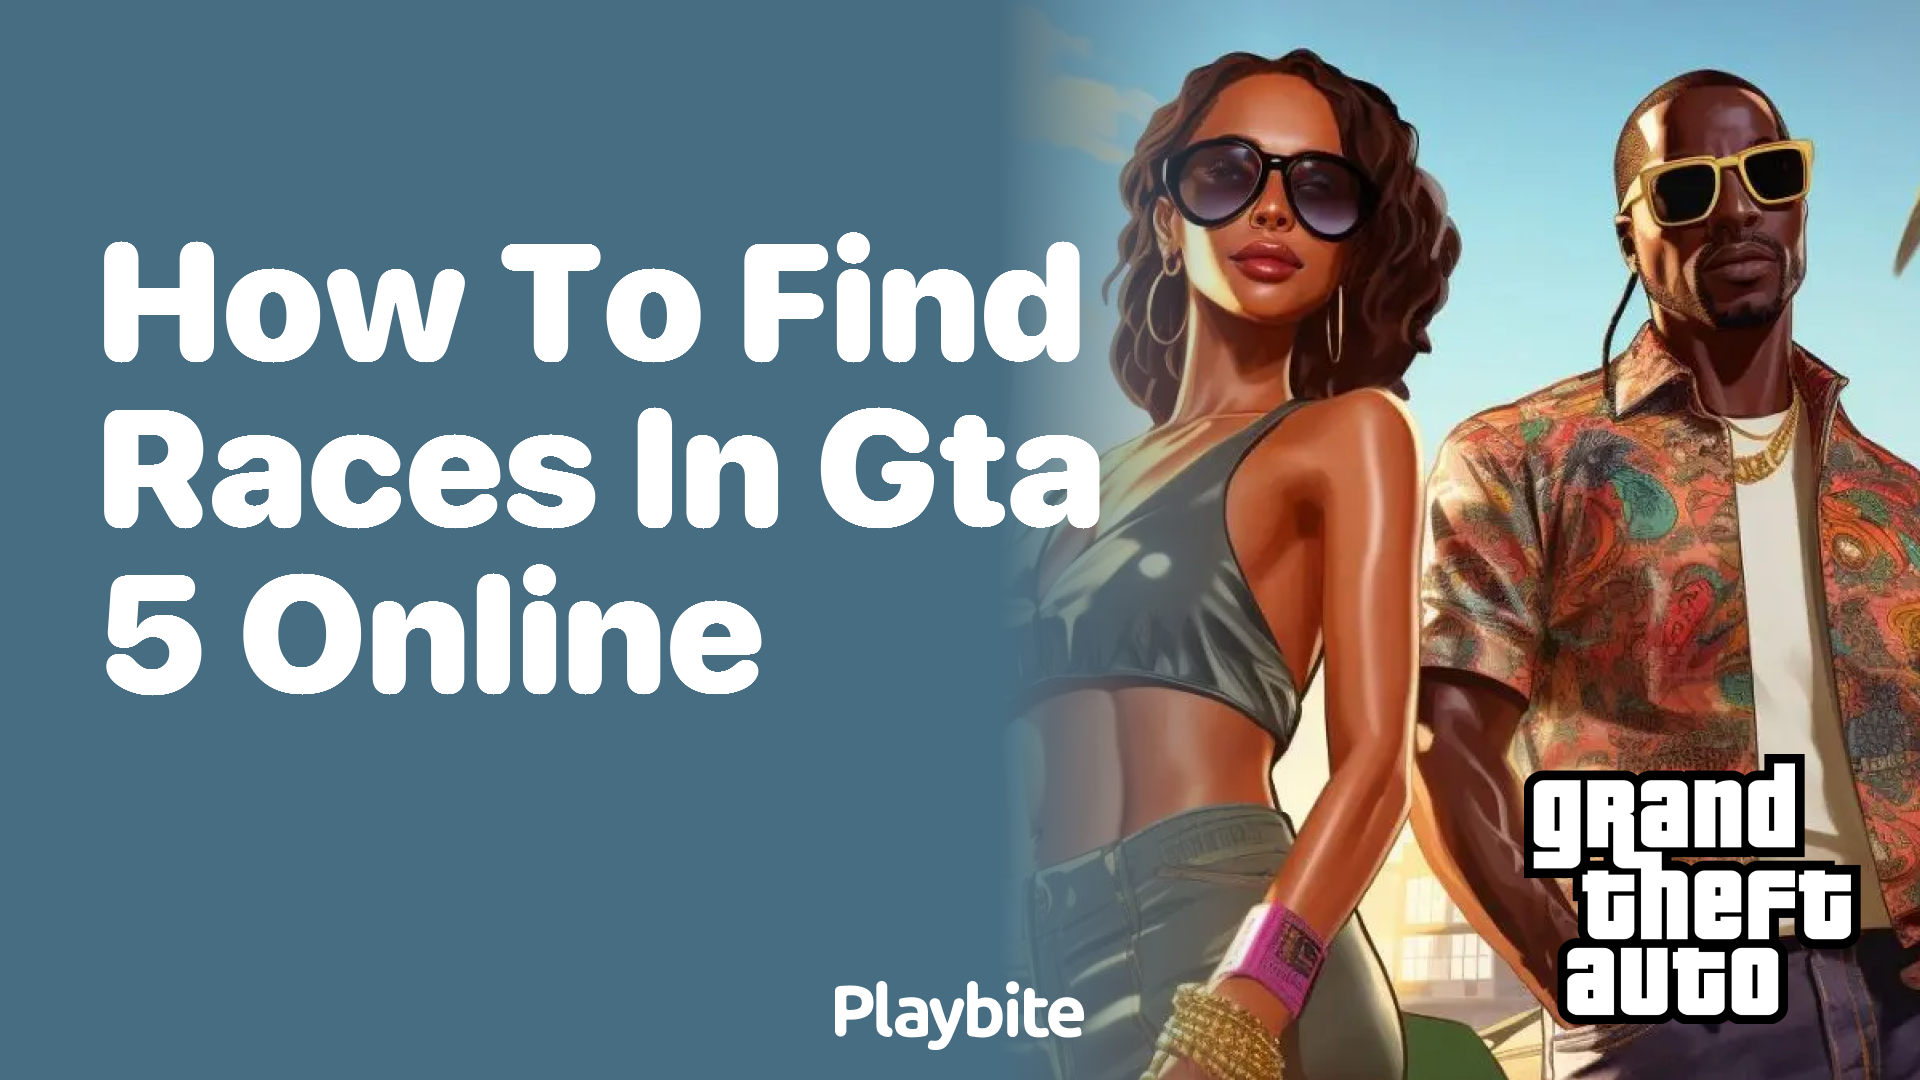 How to find races in GTA 5 Online